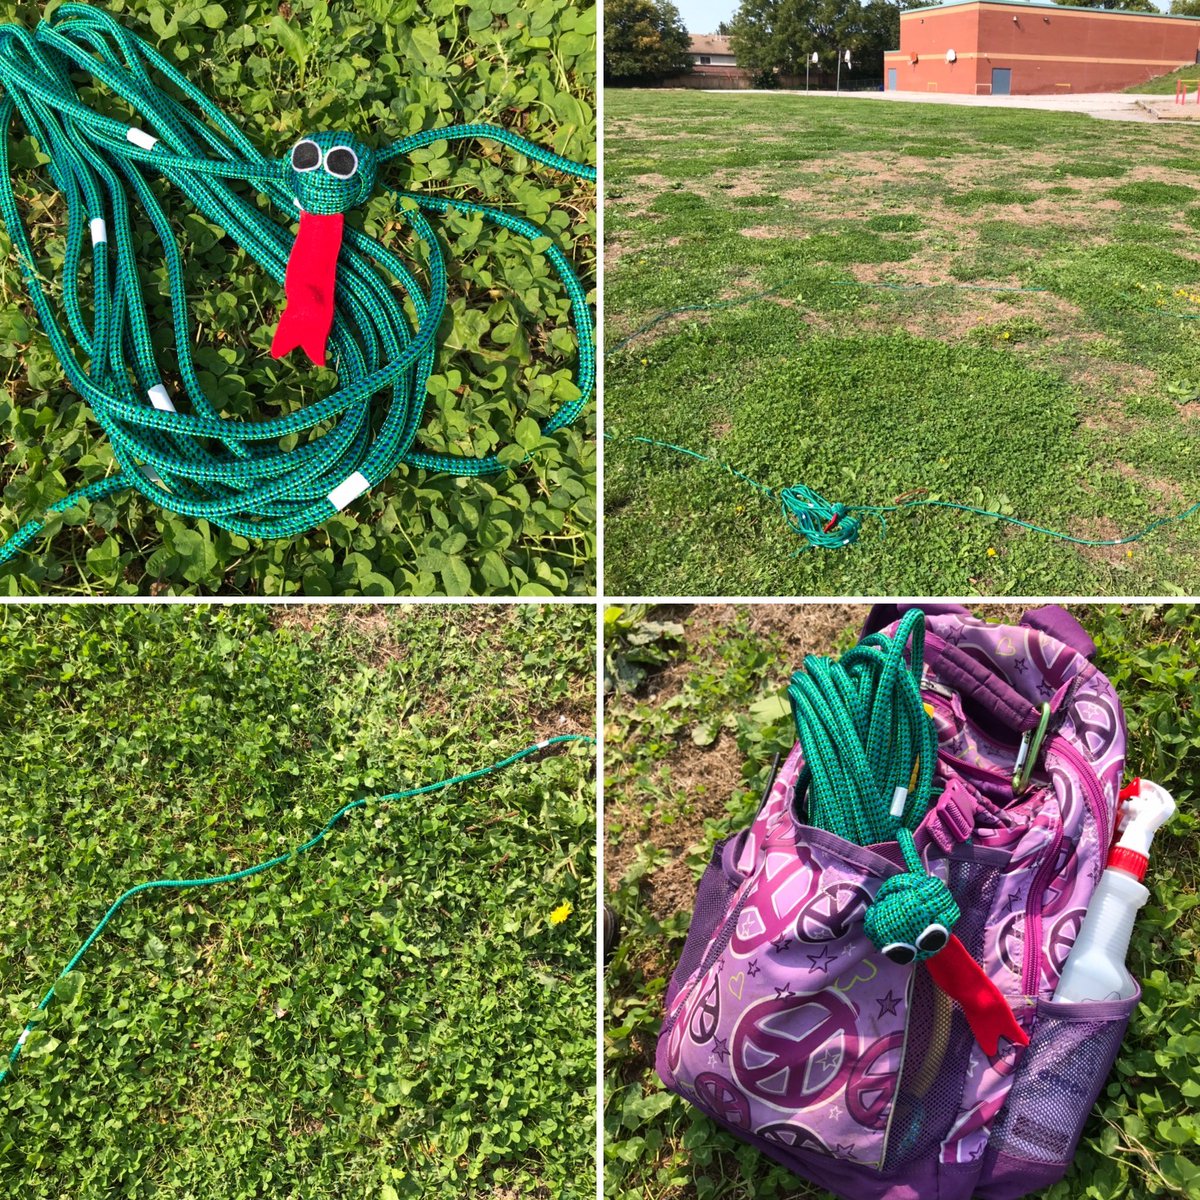 Starting to bring learners outside for learning. Meet Samuel le serpent (the snake), our friend who will help us gather safely in circle with his 1m marked stripes. @pcpsyr @InspireOutside @maruccig